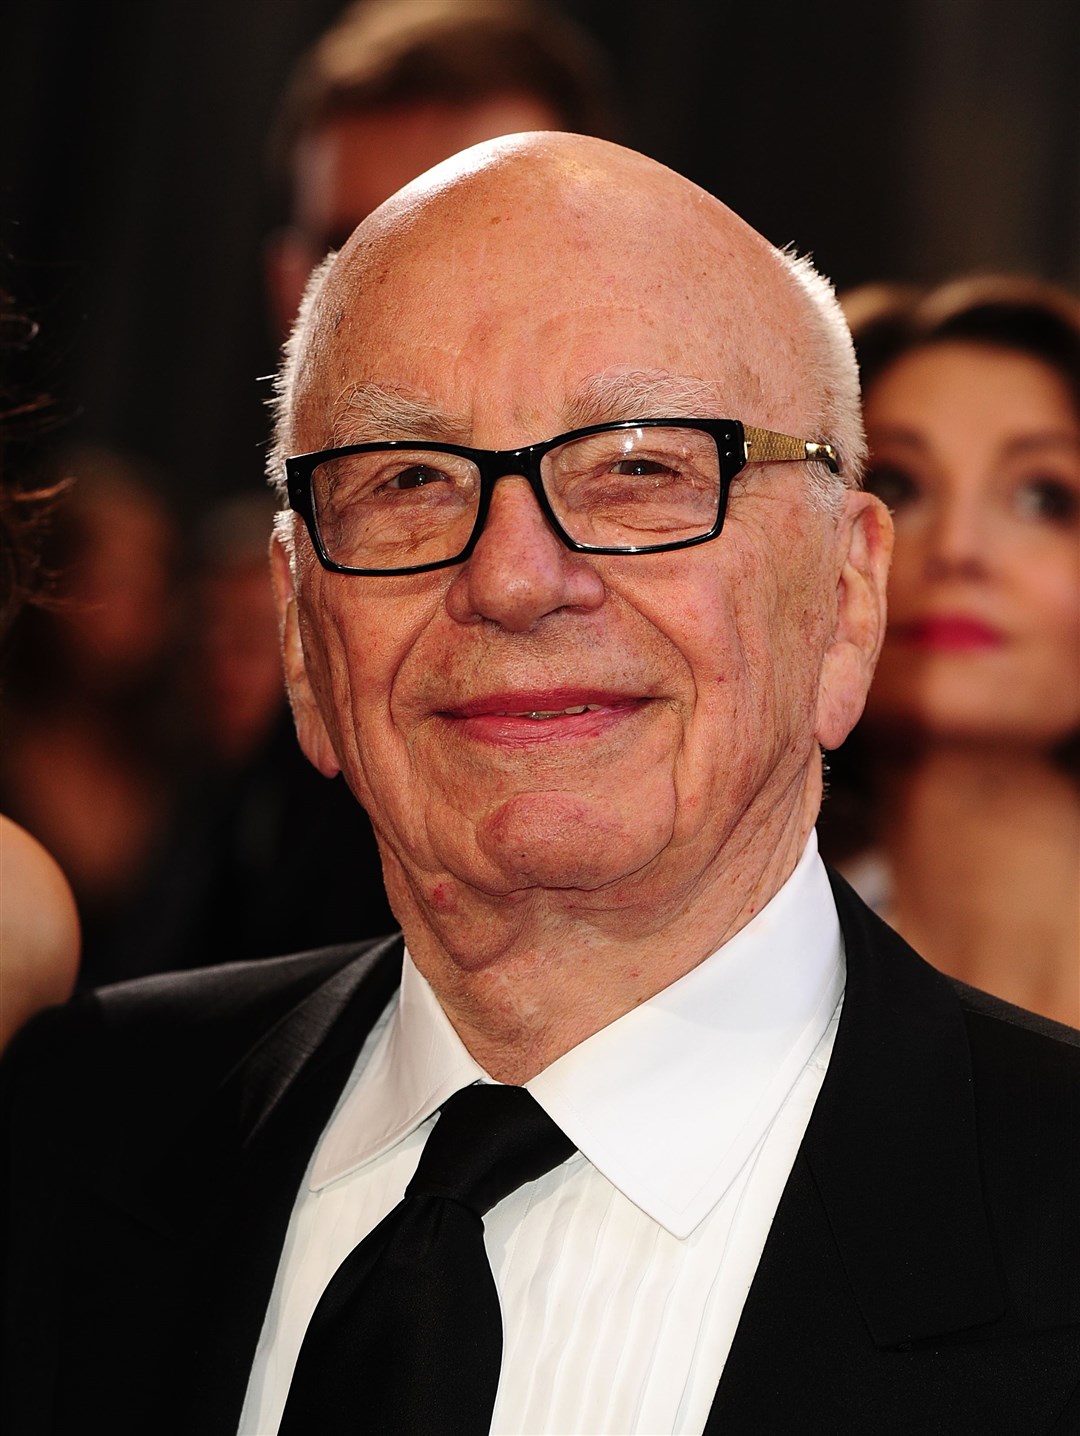 Rupert Murdoch announced his engagement to Ann Lesley Smith last month but reports say it has now been ‘called off’ (Ian West/PA)